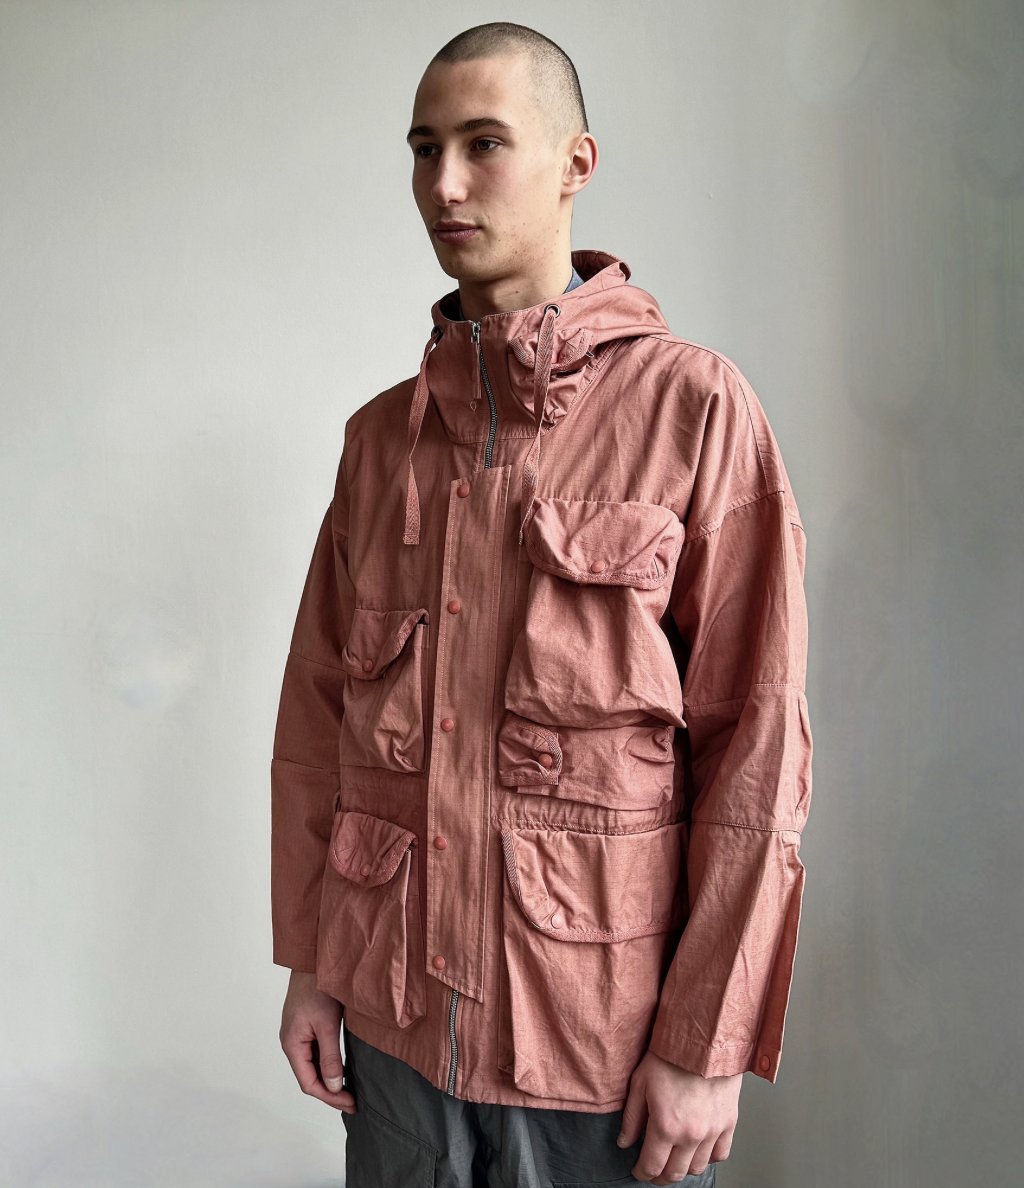 Dusty pink garment dyed Surtees jacket in ripstop cotton. Contact: info@hawkwoodmercantile.com #hawkwoodmercantile #hawkwood #menswear #outerwear #coat #jacket #garmentdyed #ripstop